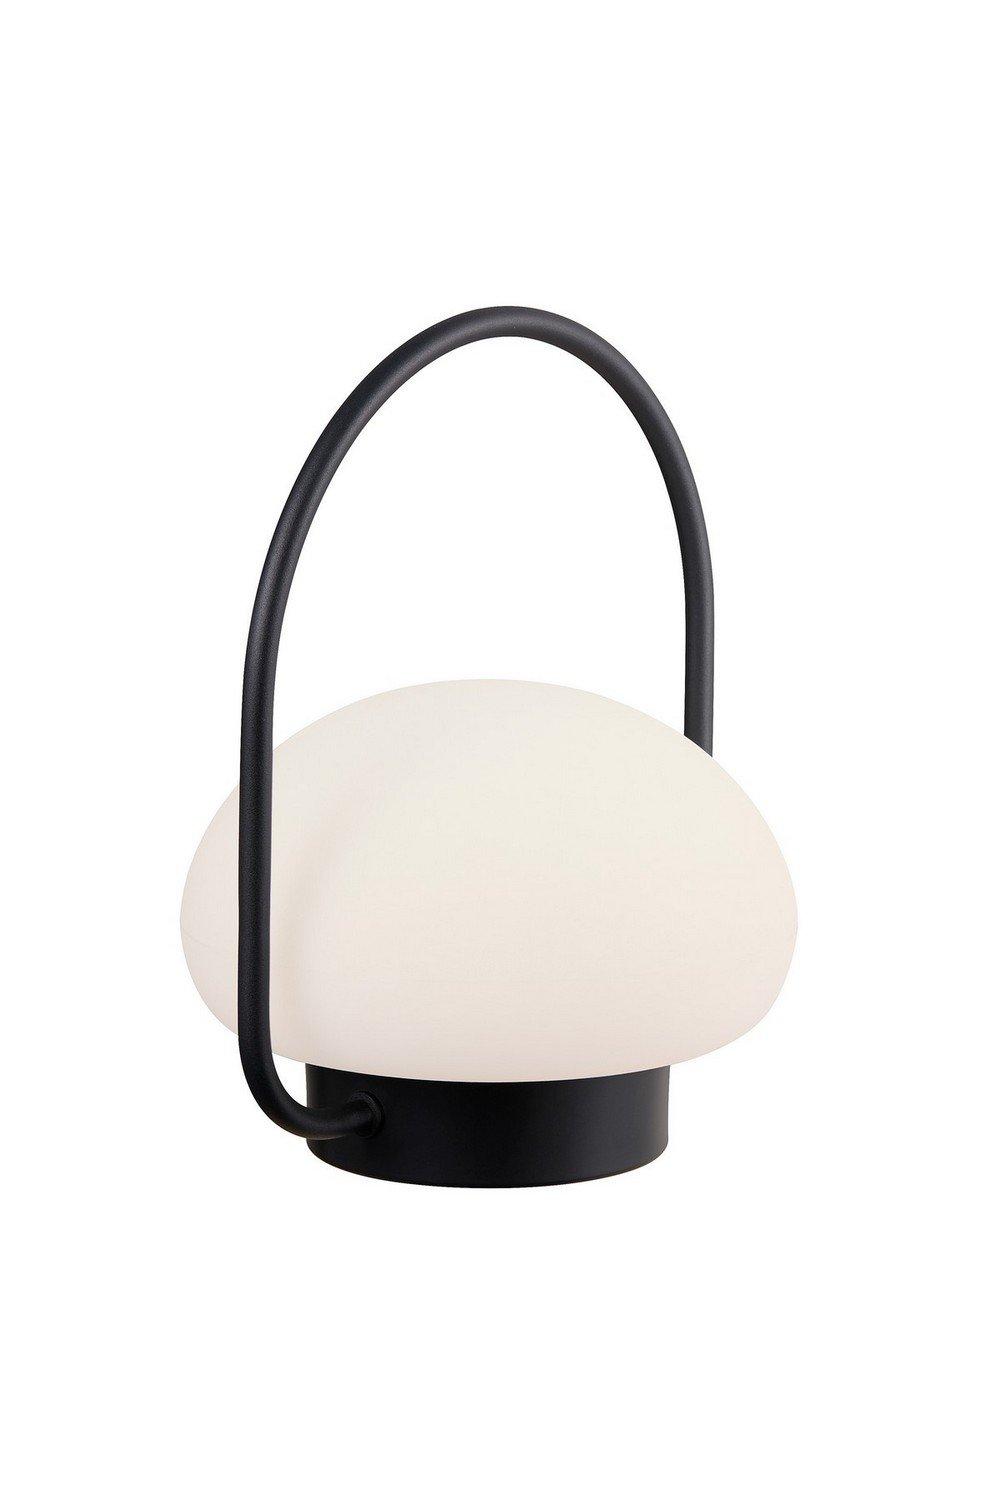 Sponge To Go LED Dimmable Outdoor Portable Lamp White IP65 2700K